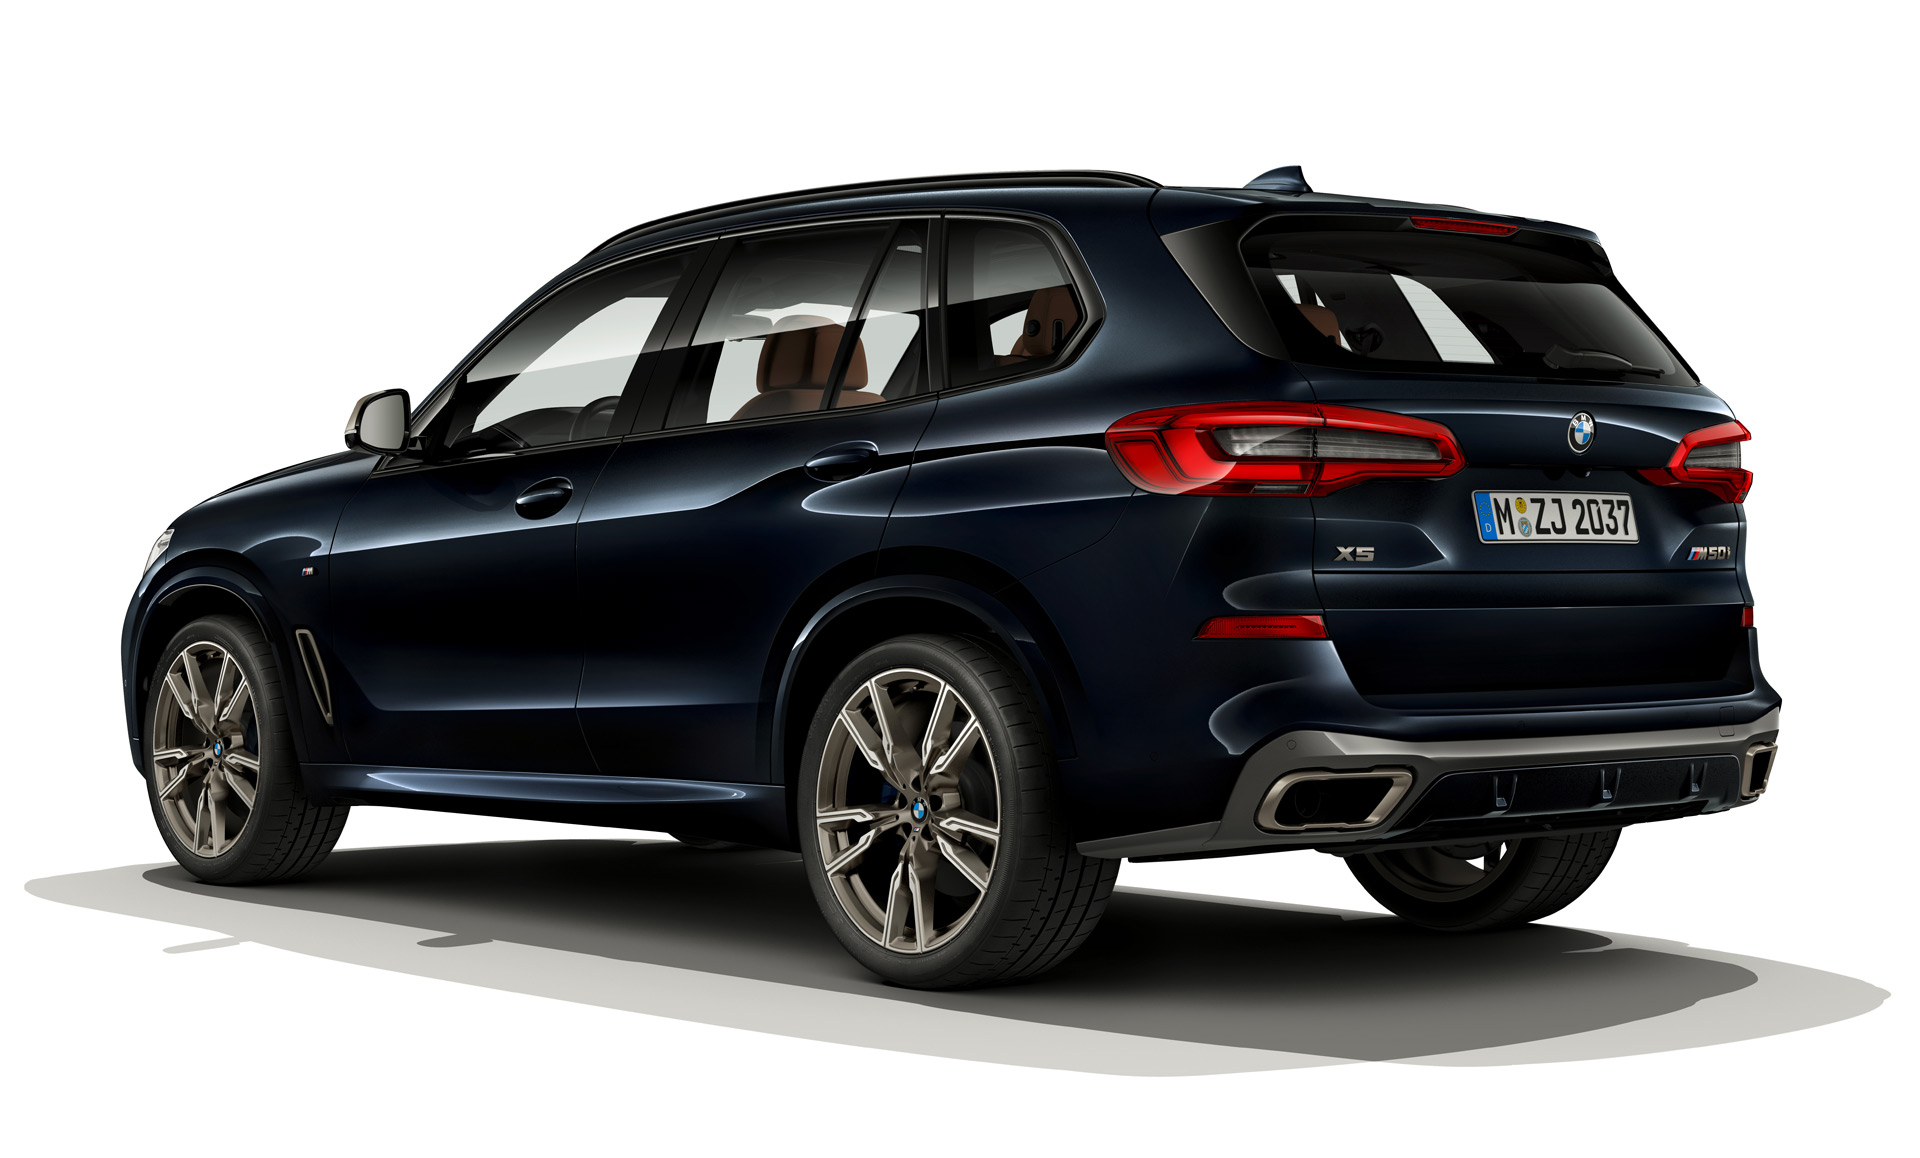 BMW X5 and X7 spawn sporty M50i models delivering 523 horsepower of grunt